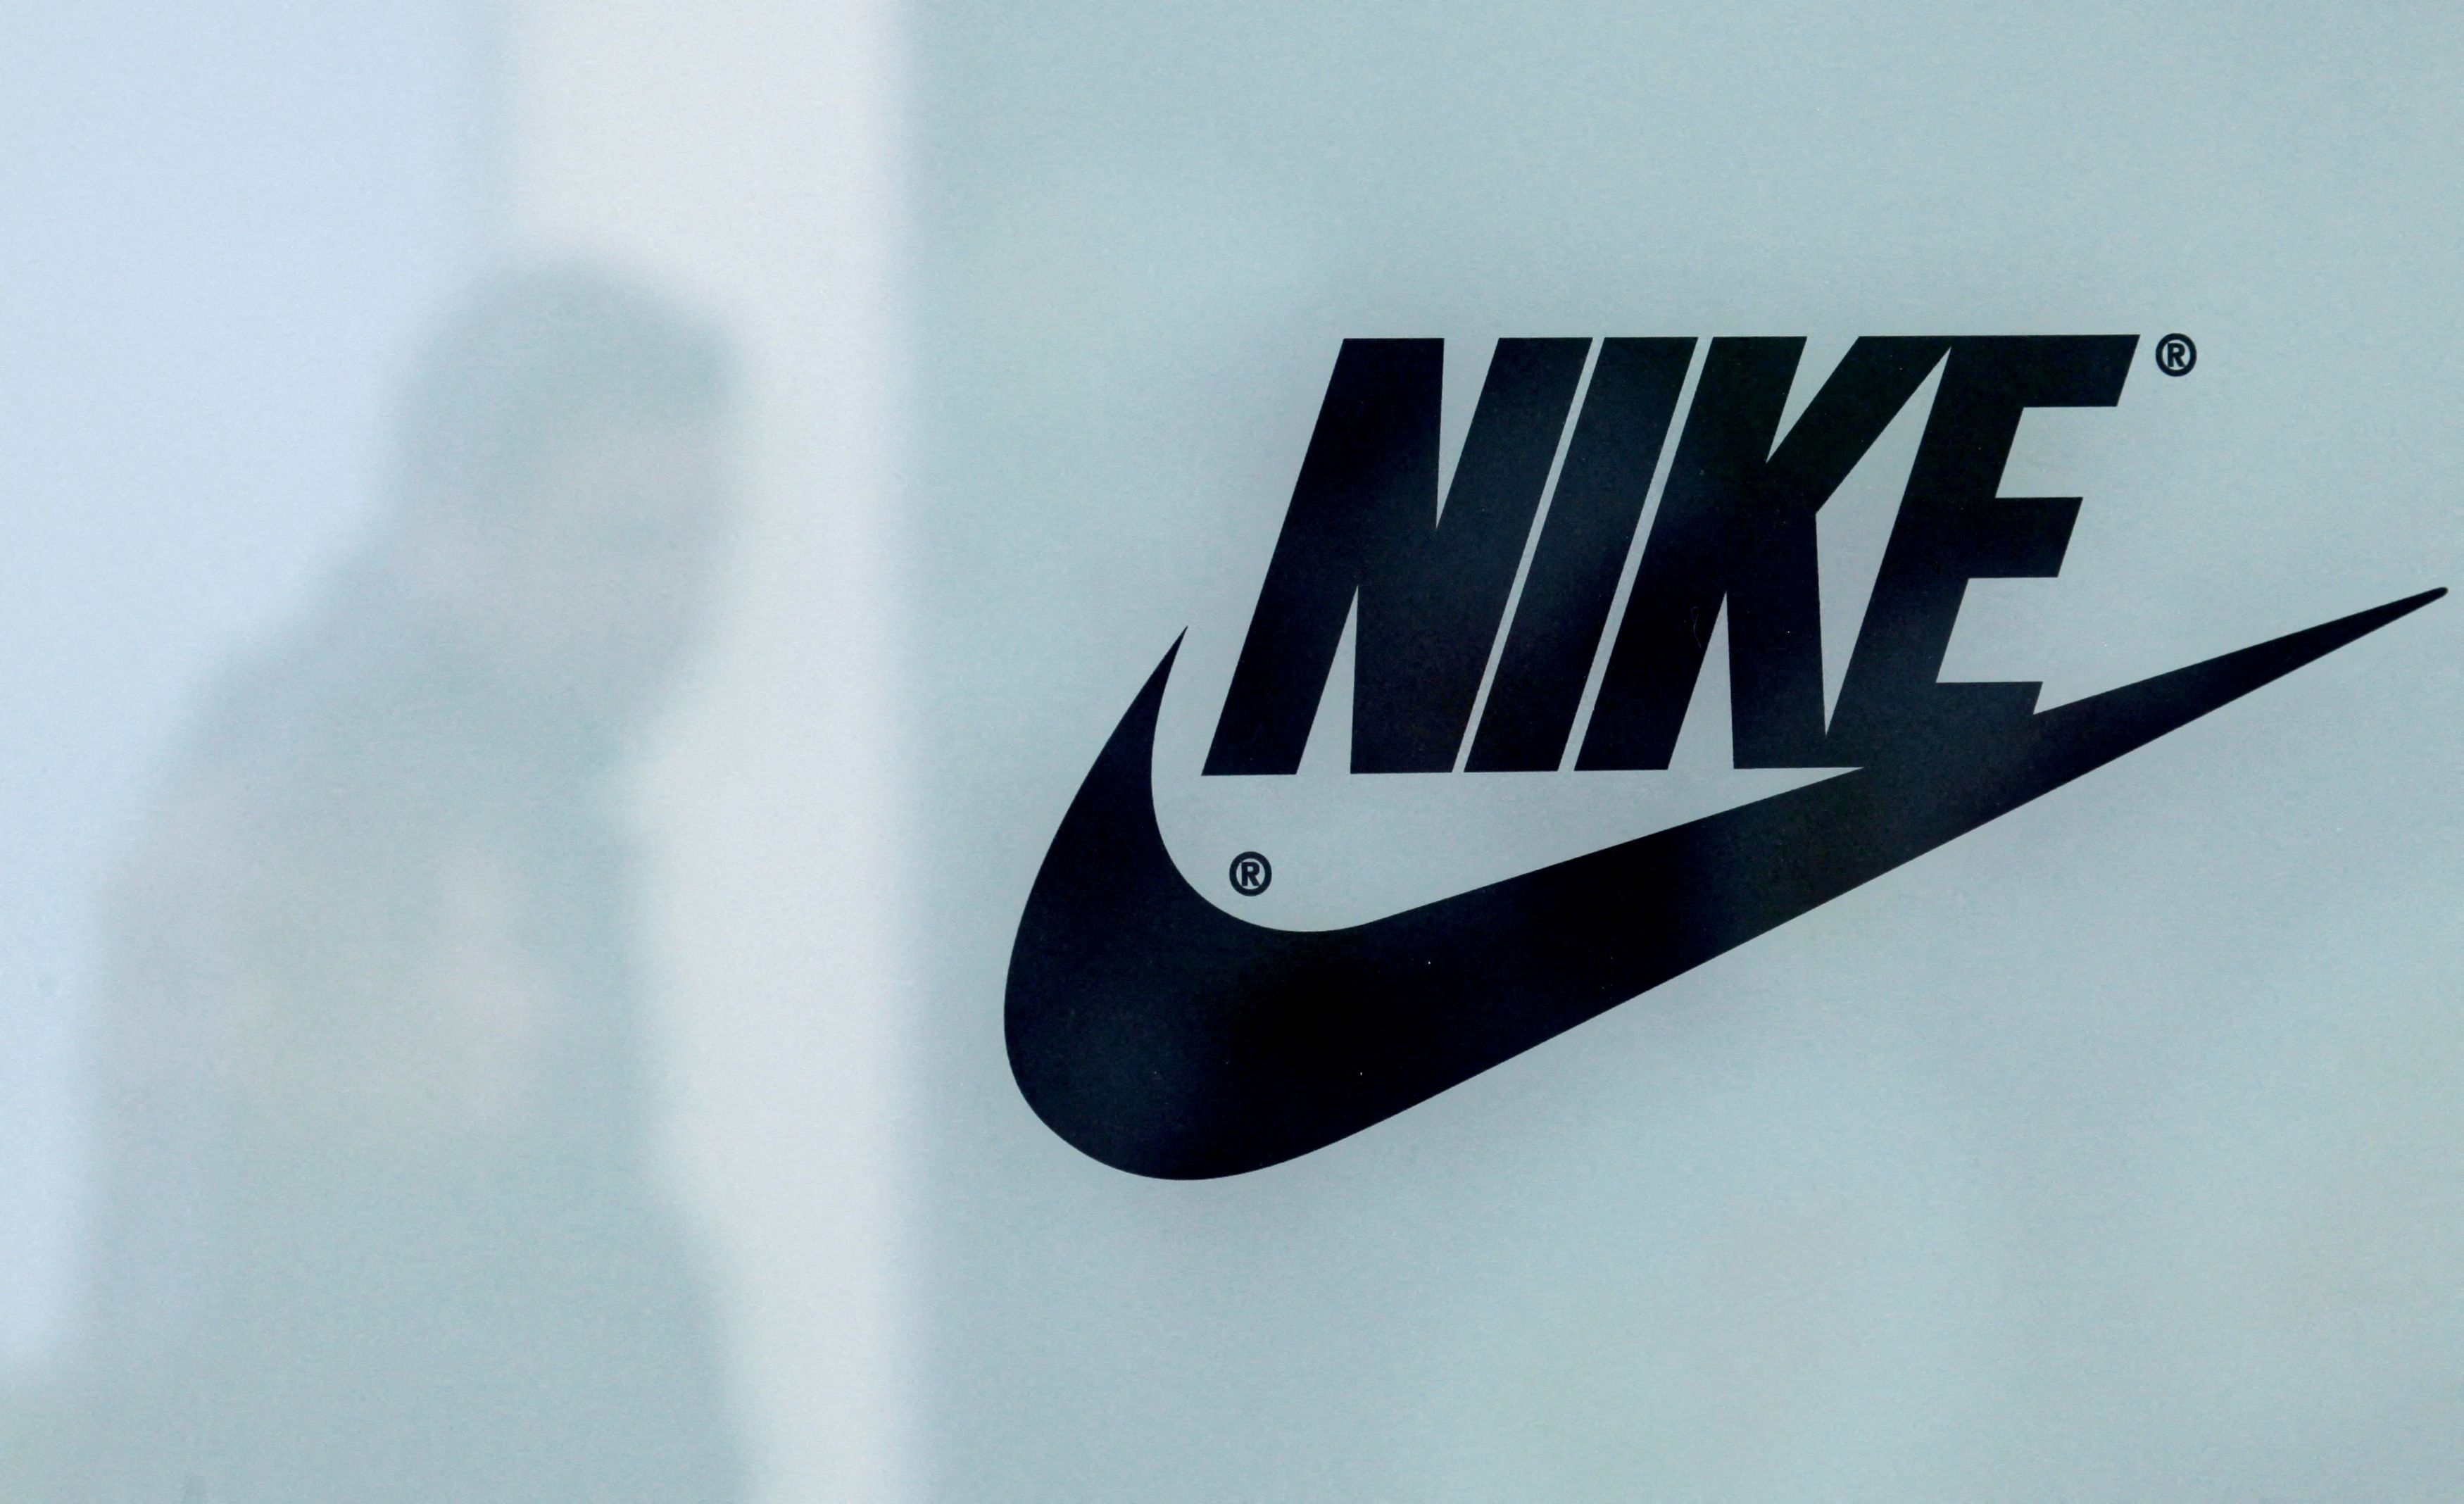 Some Independent Nike Stores Remain Open In Russia Over A Week After Closure Announcement Reuters